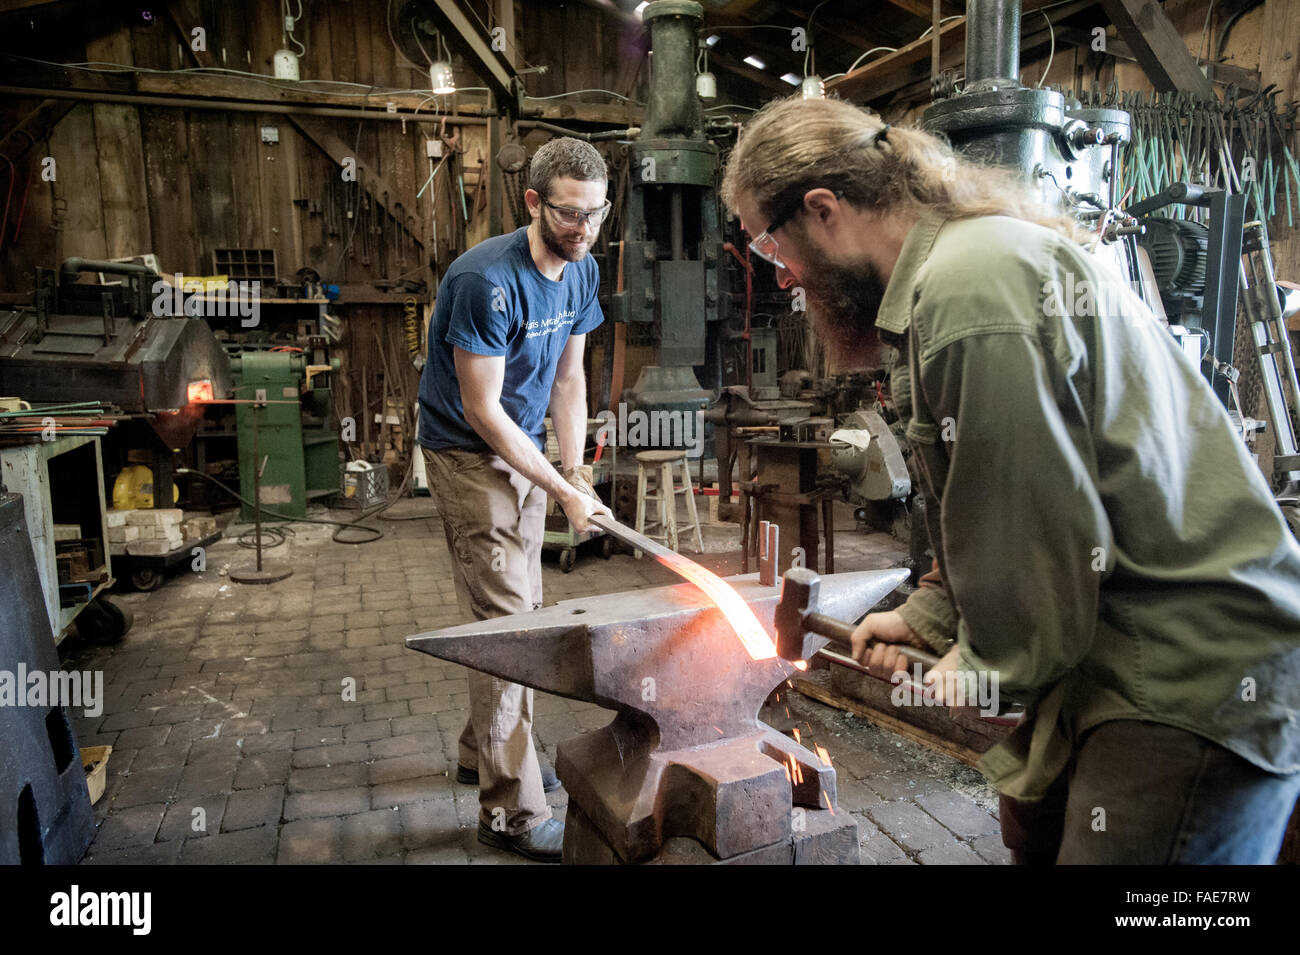 Blacksmith in his Forge with an apprentice Stock Photo